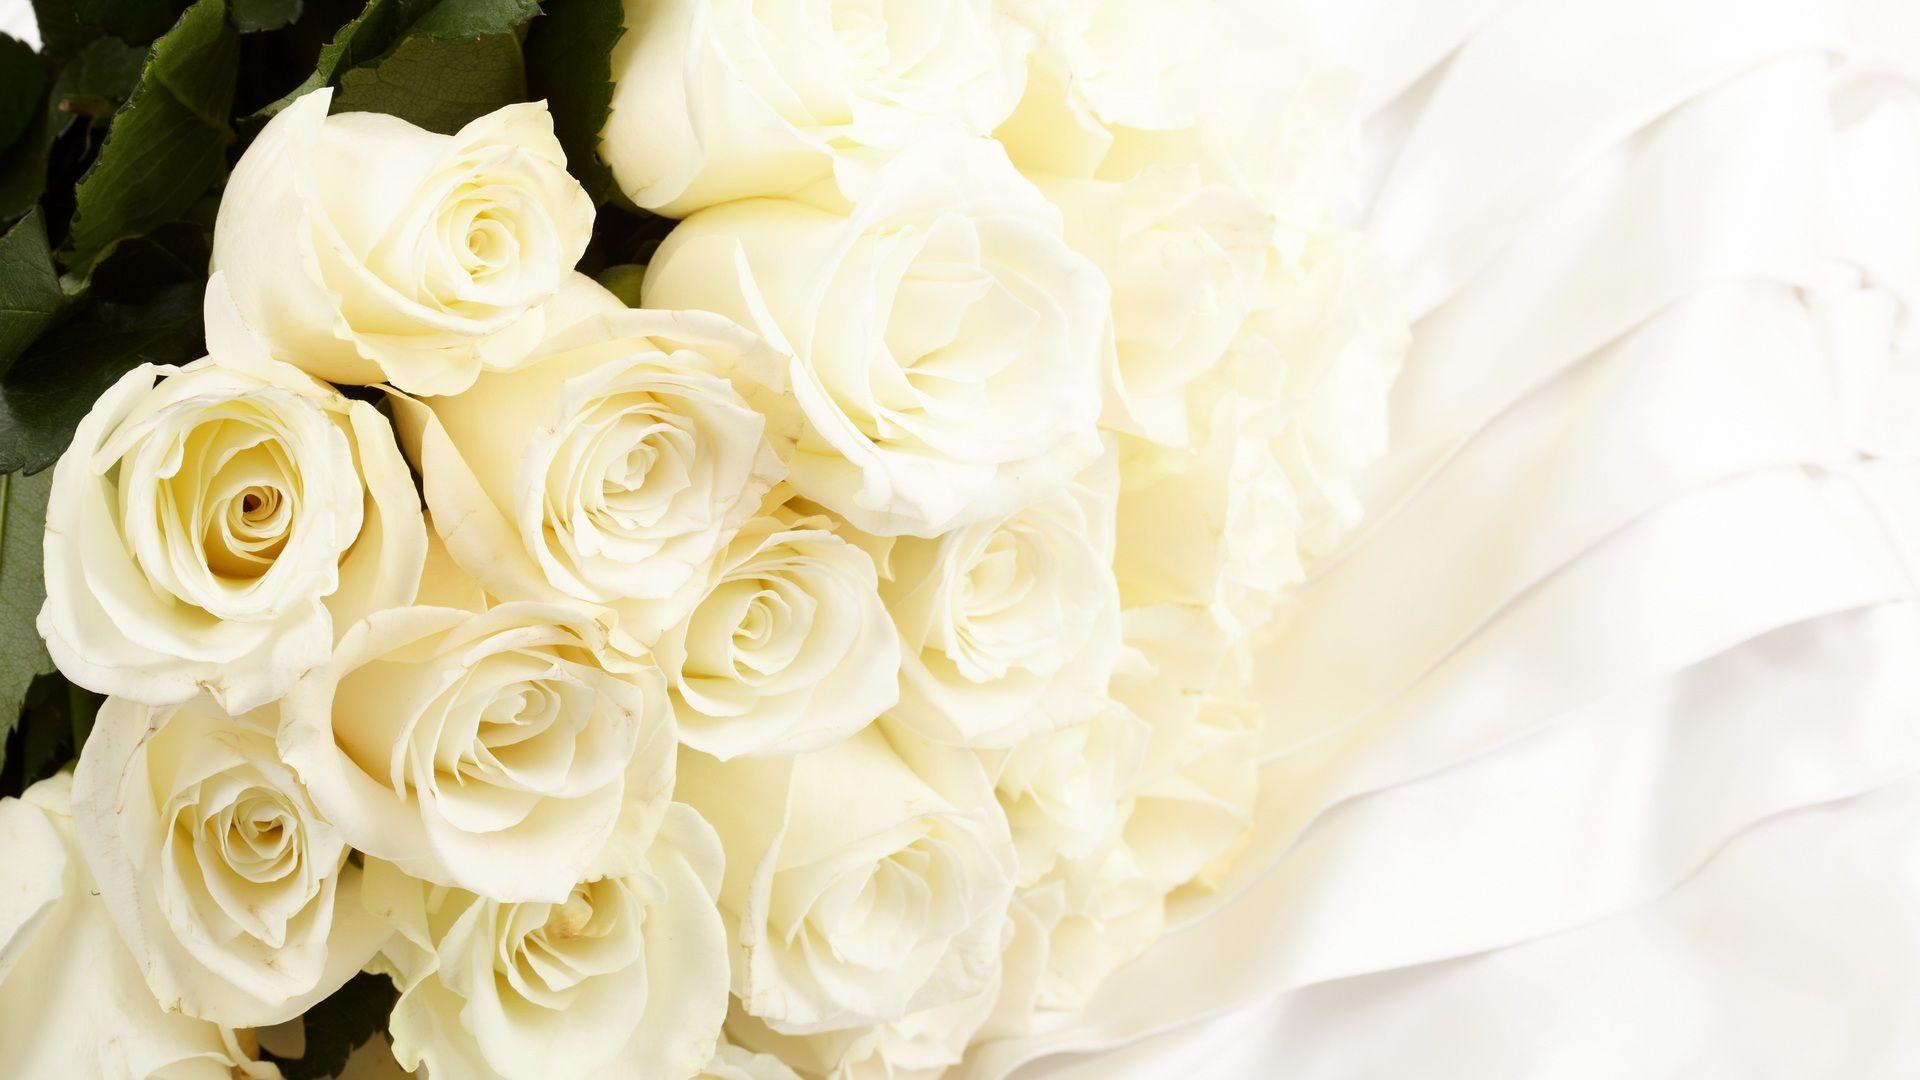 px Gorgeous High Resolution Picture of White Rose, Full HD 1080p